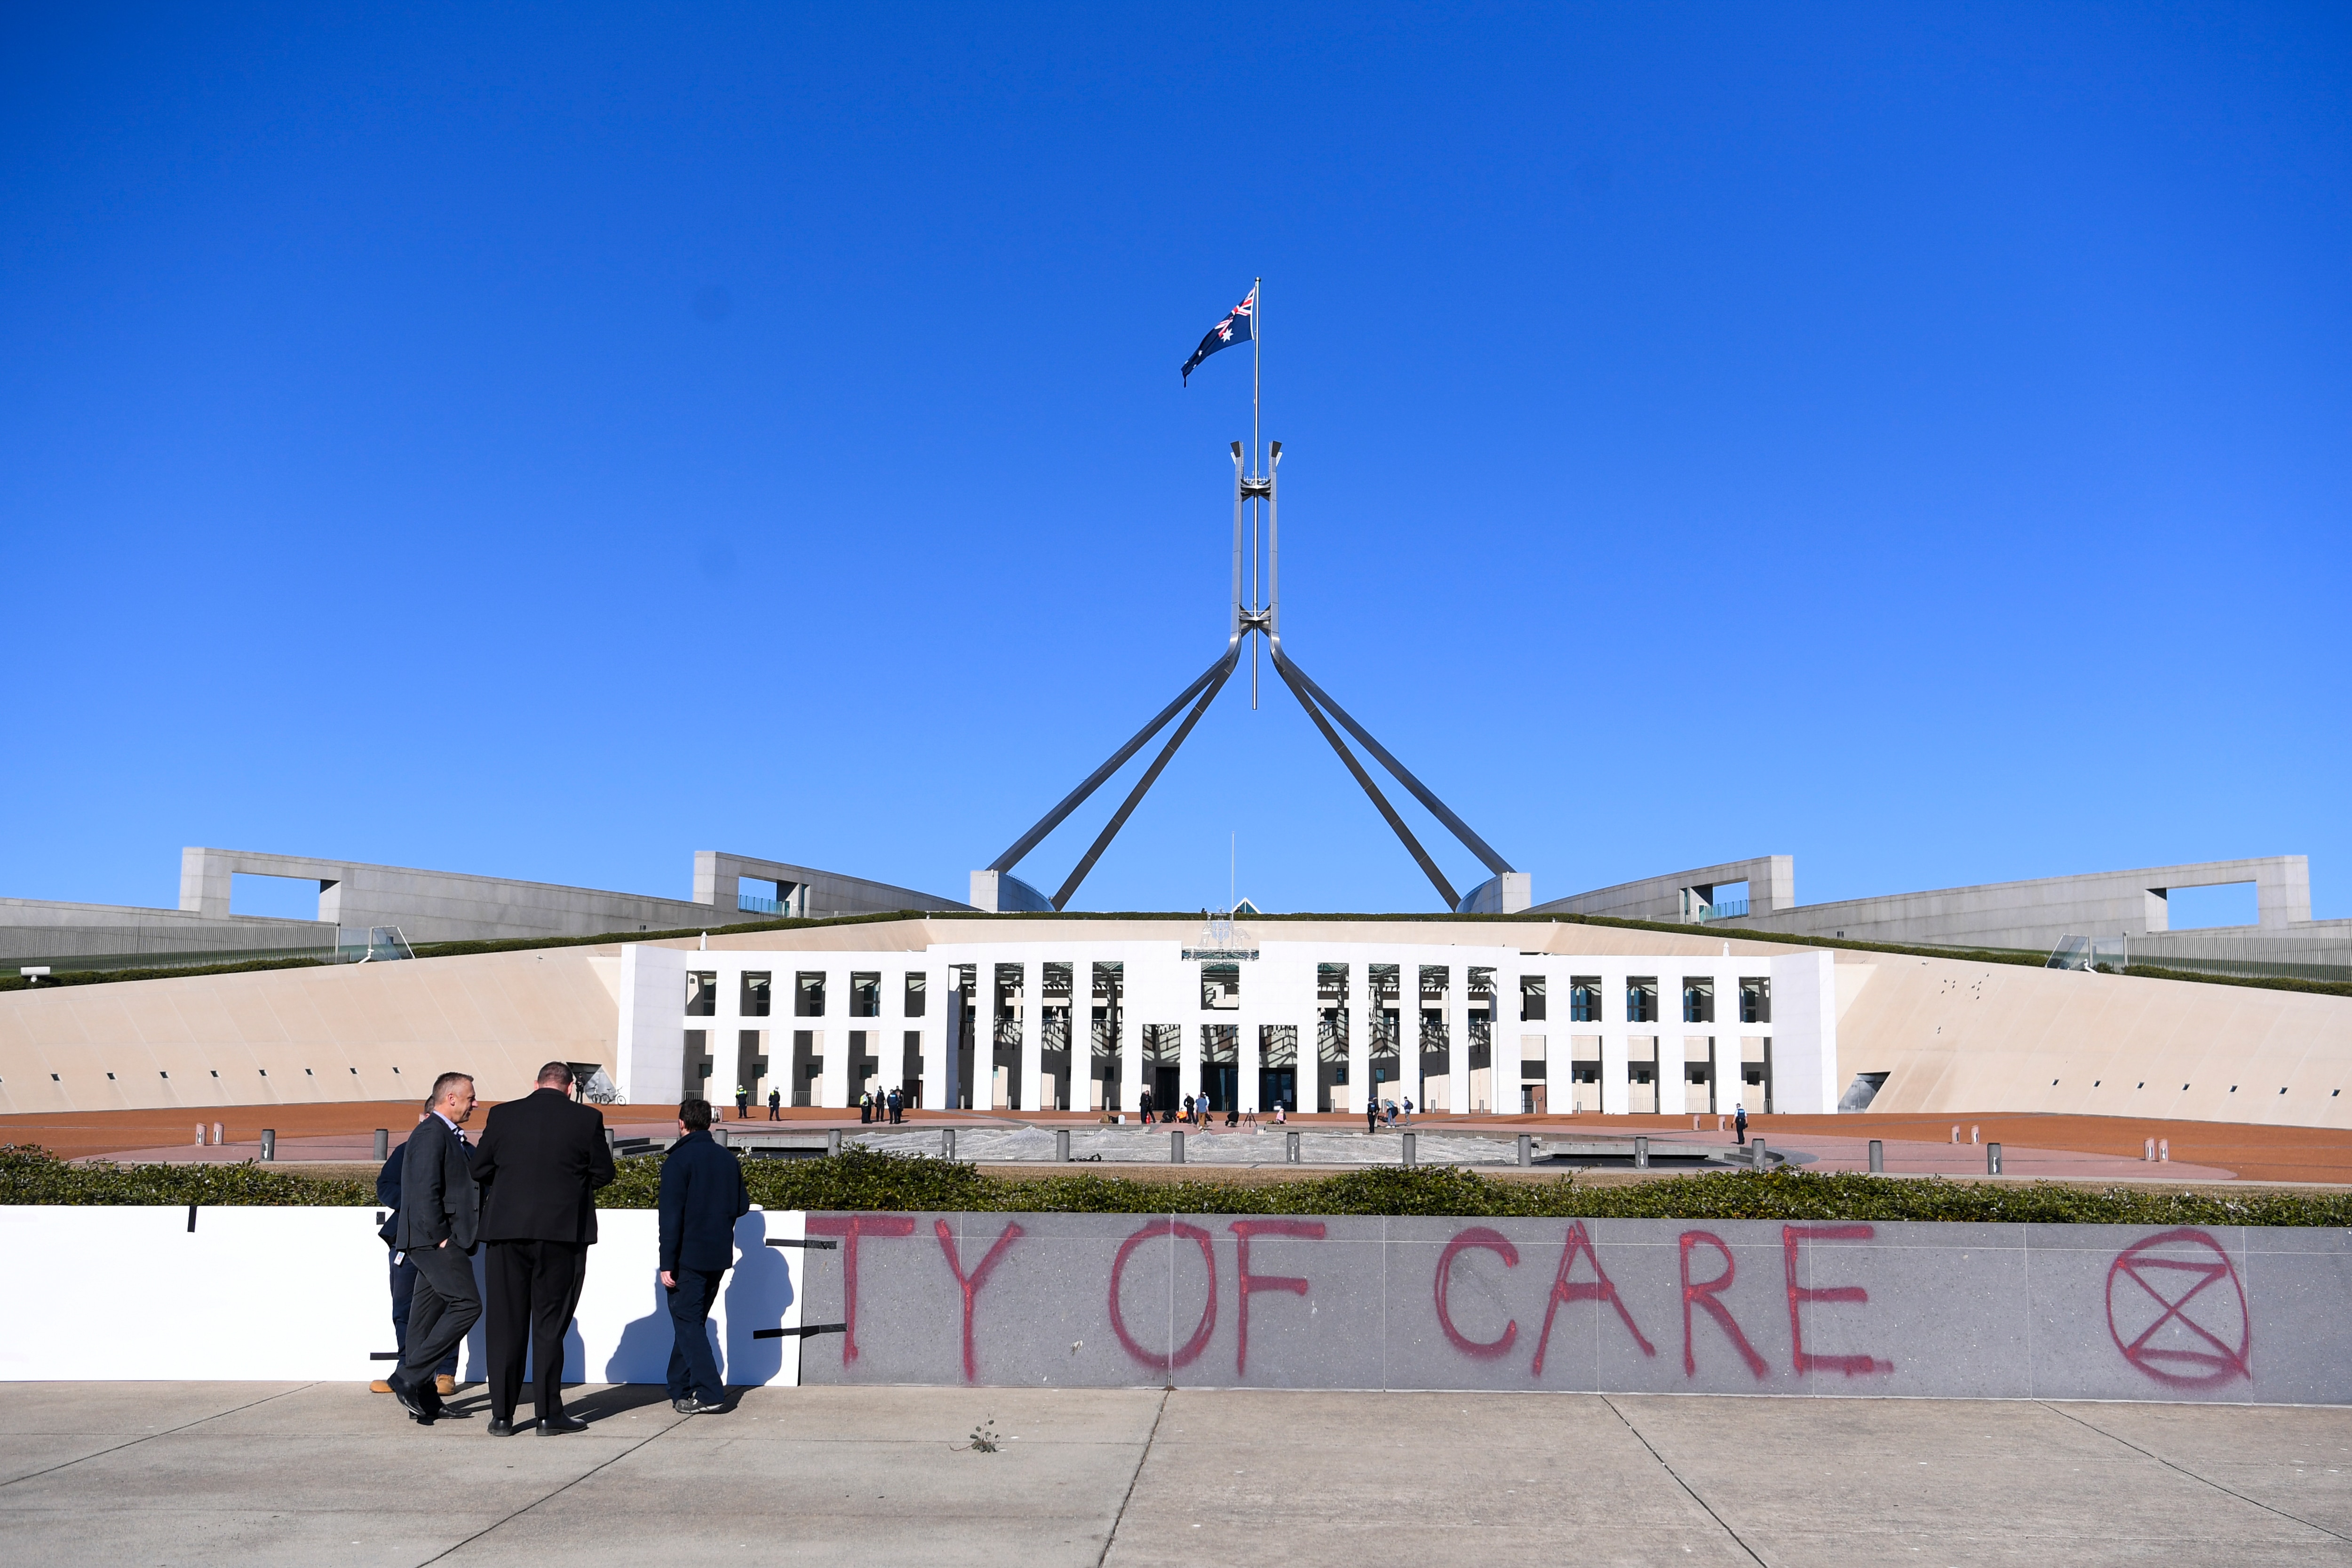 Workers cover the slogan Duty of Care after an Extinction Rebellion protest outside Parliament House.